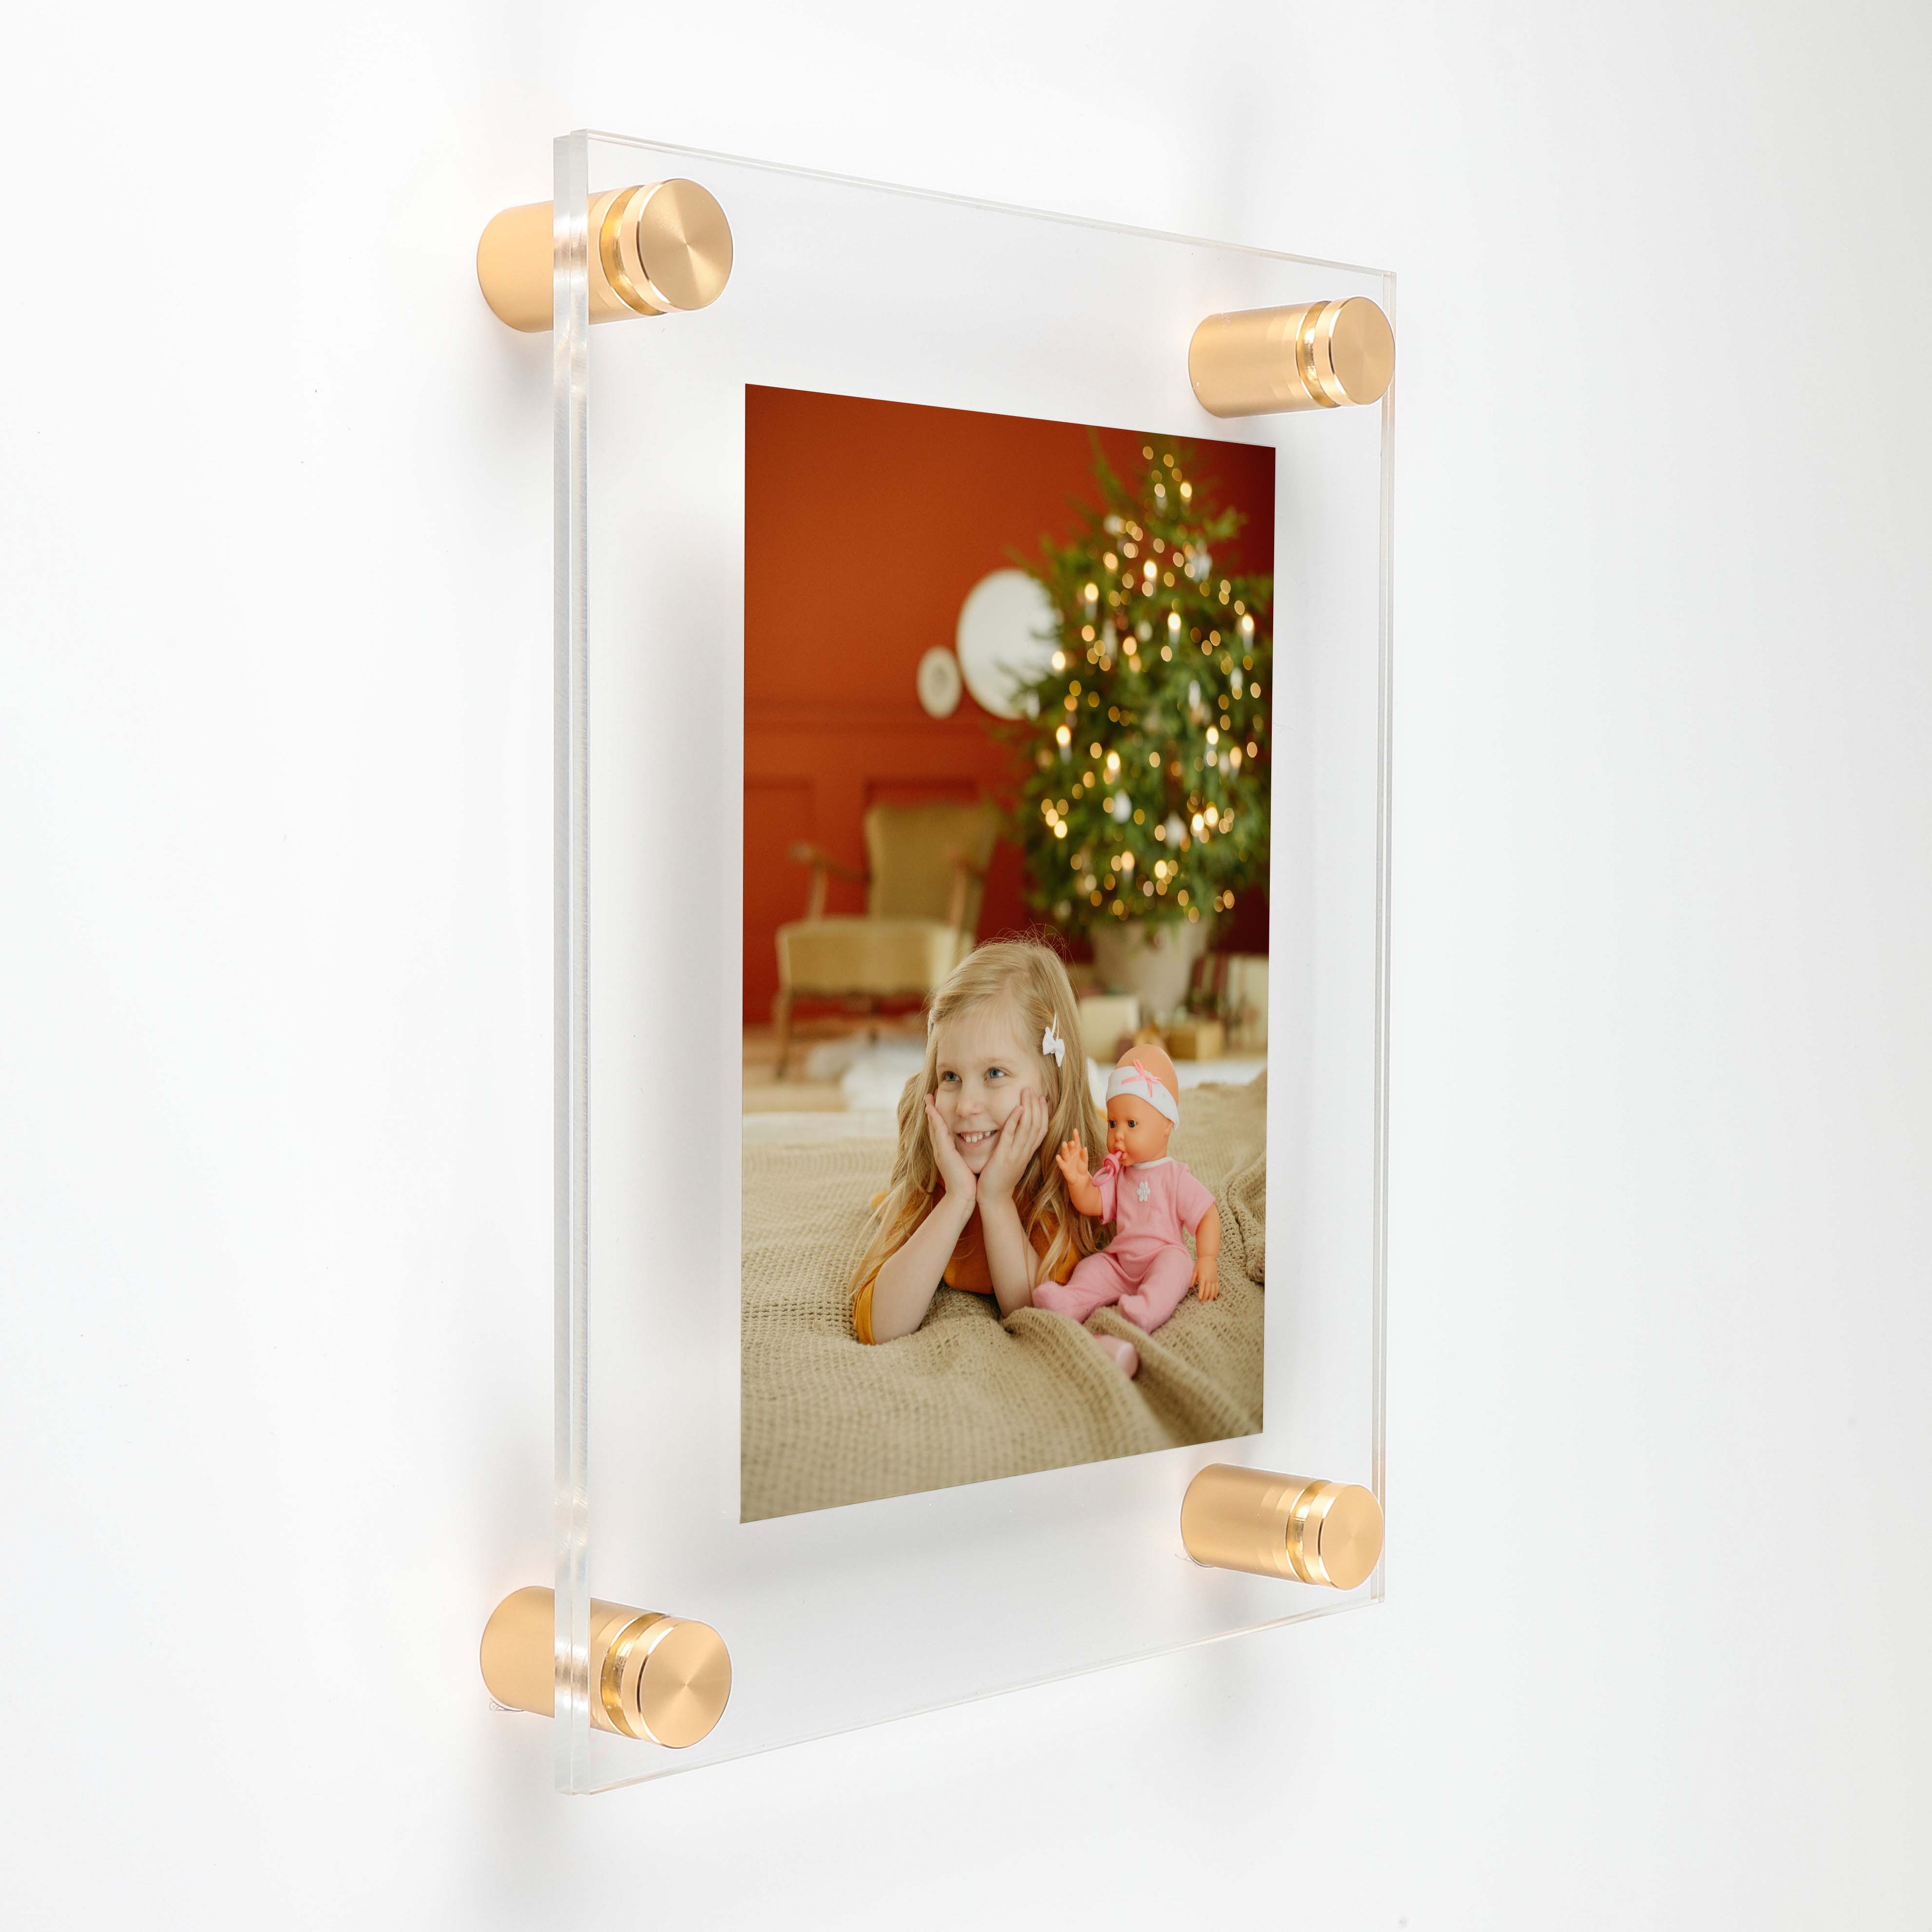 (2) 13-1/2'' x 19-1/2'' Clear Acrylics , Pre-Drilled With Polished Edges (Thick 3/16'' each), Wall Frame with (4) 5/8'' x 1'' Champagne Anodized Aluminum Standoffs includes Screws and Anchors